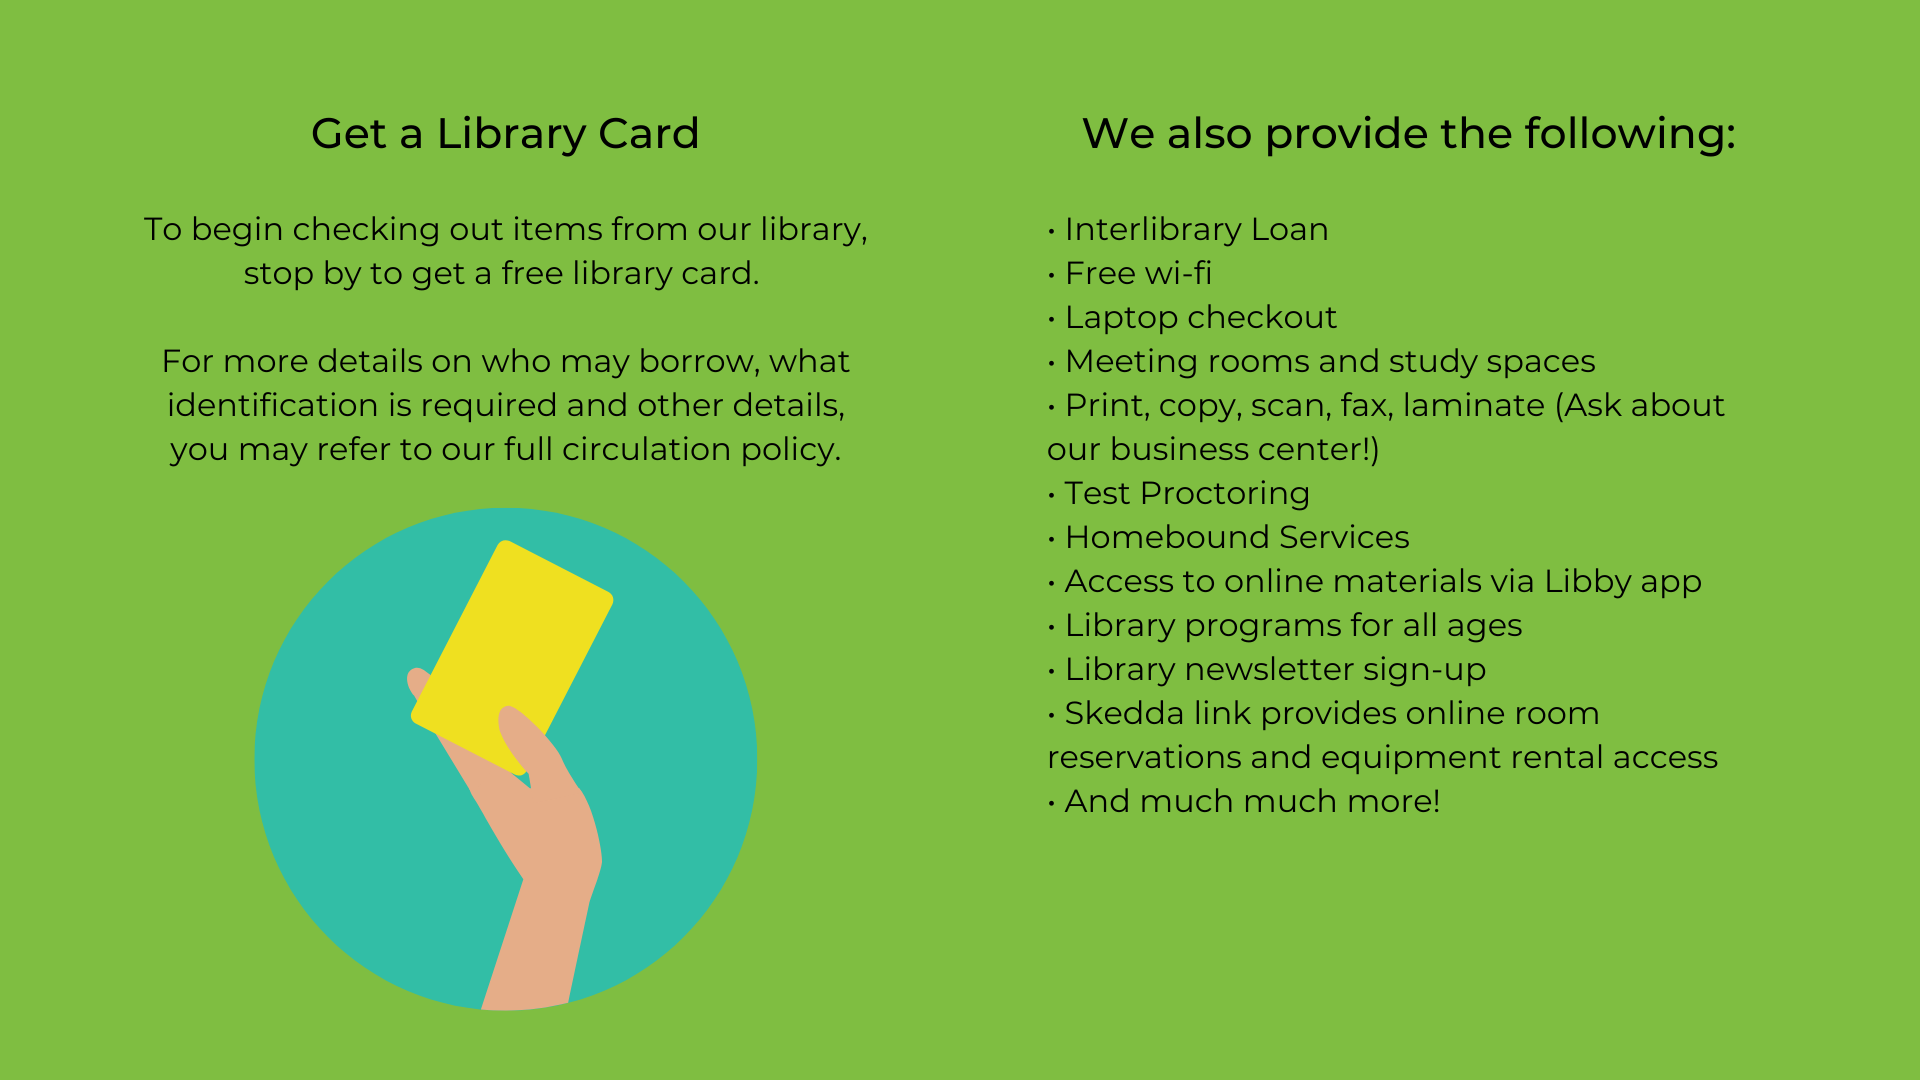 Get a Library Card To begin checking out items from our library, stop by to get a free library card. For more details on who may borrow, what identification is required and other details, read our full circulation-4.png